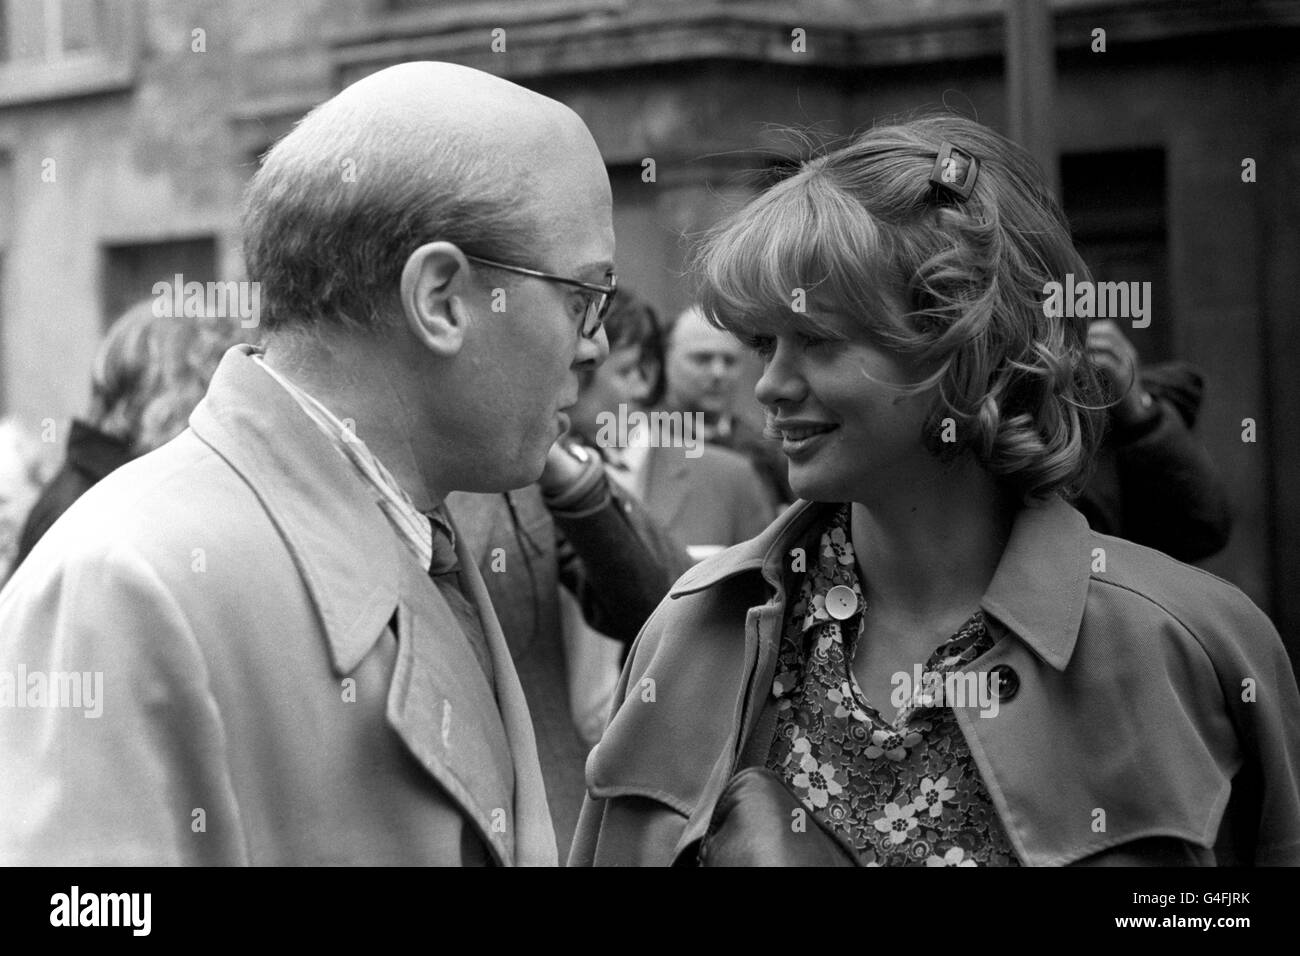 Actor Richard Attenborough, left, visiting the former No. 10 Rillington Place, Notting Hill, the home of mass-murderer, John Reginald Halliday Christie, who was hanged in 1953. Attenborough, in the guise of the murderer, is portraying Christie in the film '10 Rillington Place'. With him is actress Judy Geeson, who portrays Beryl Evans, one of the eight known women murdered by Christie. Stock Photo